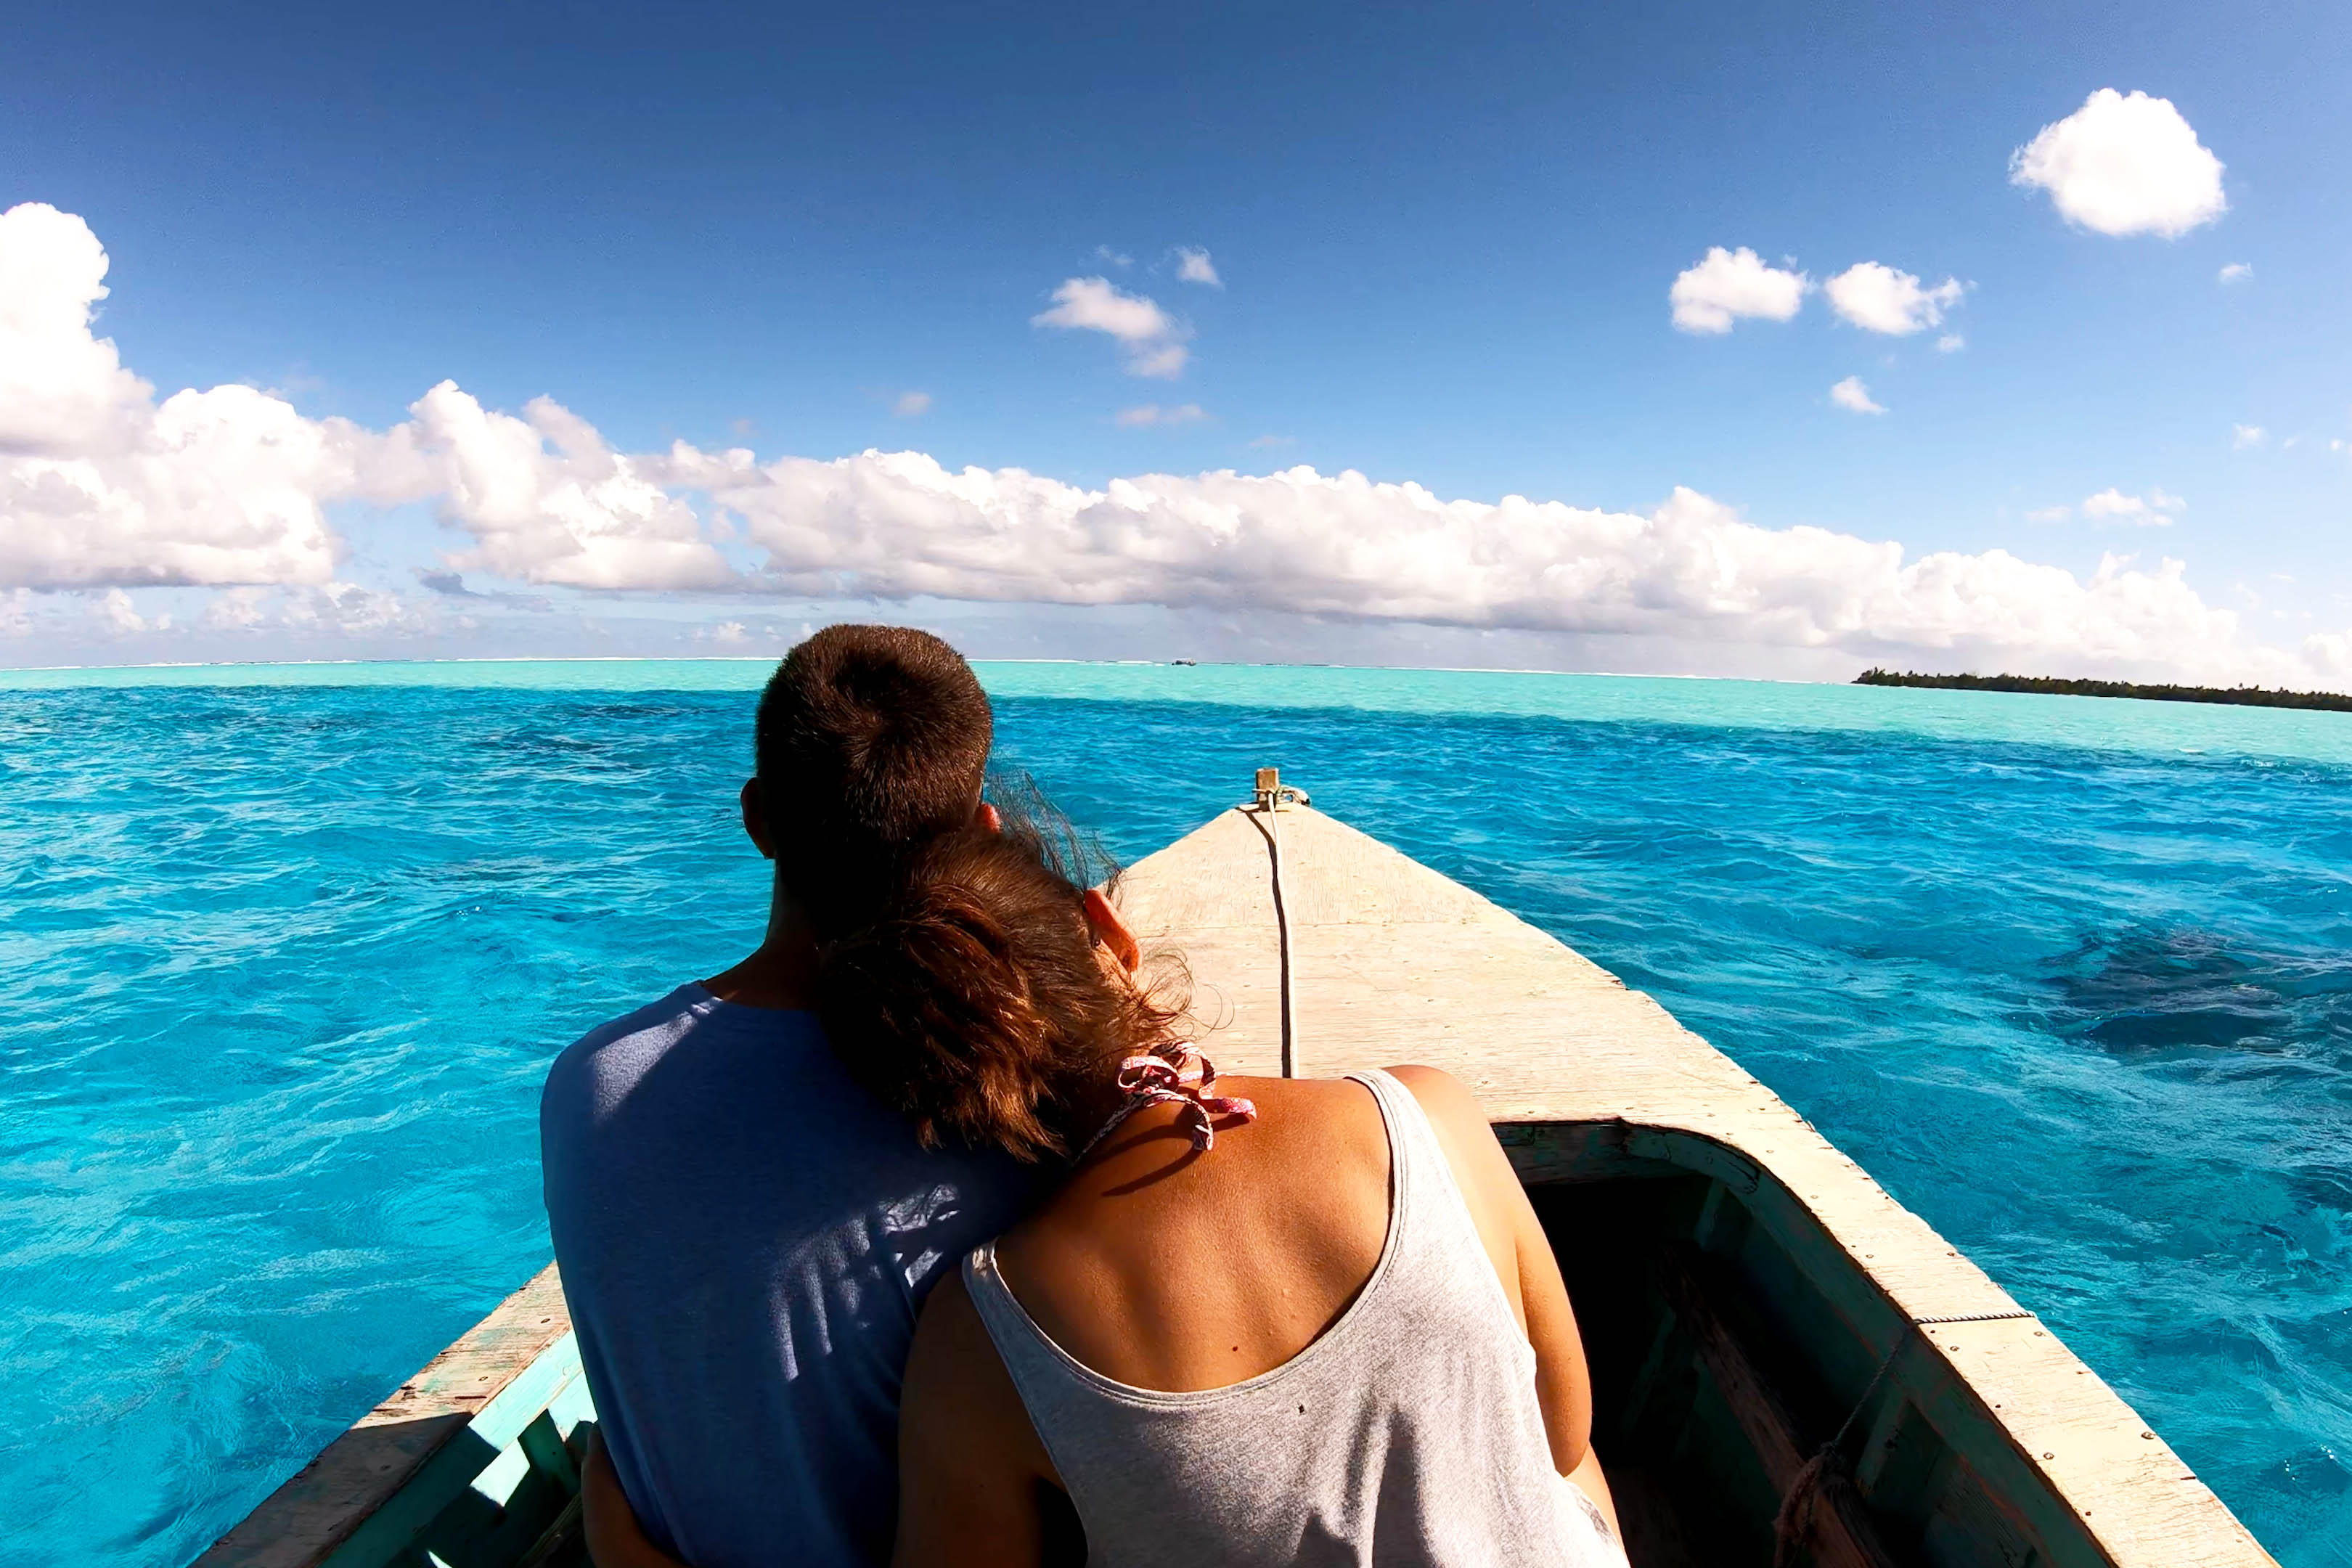 Take boat trips out on bright blue lagoons | Travel Nation